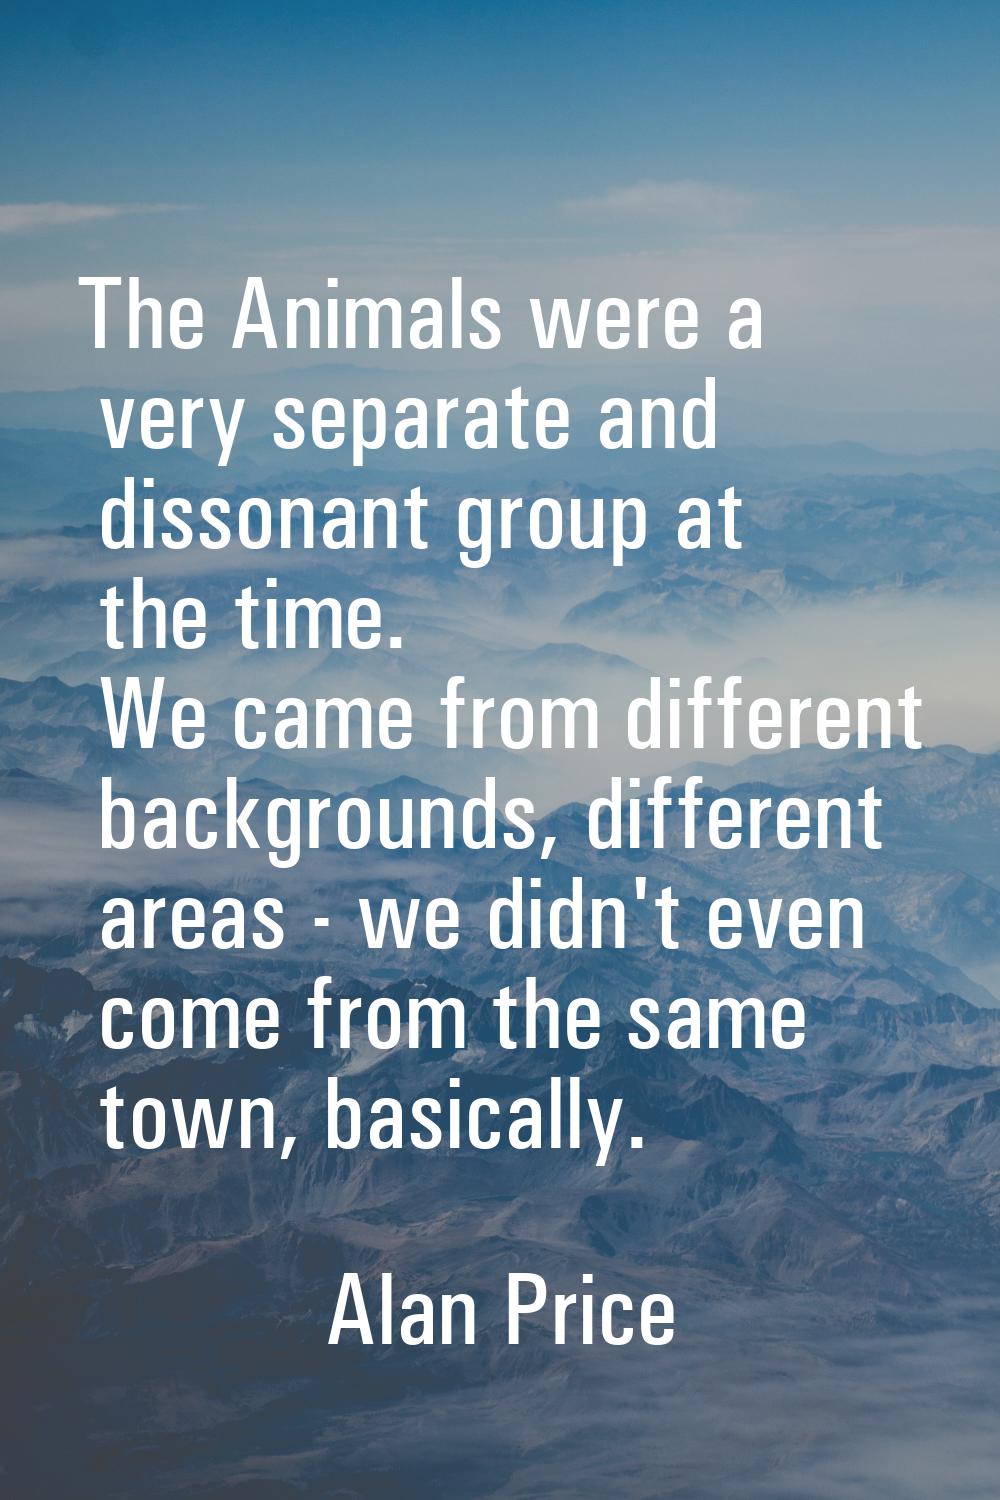 The Animals were a very separate and dissonant group at the time. We came from different background